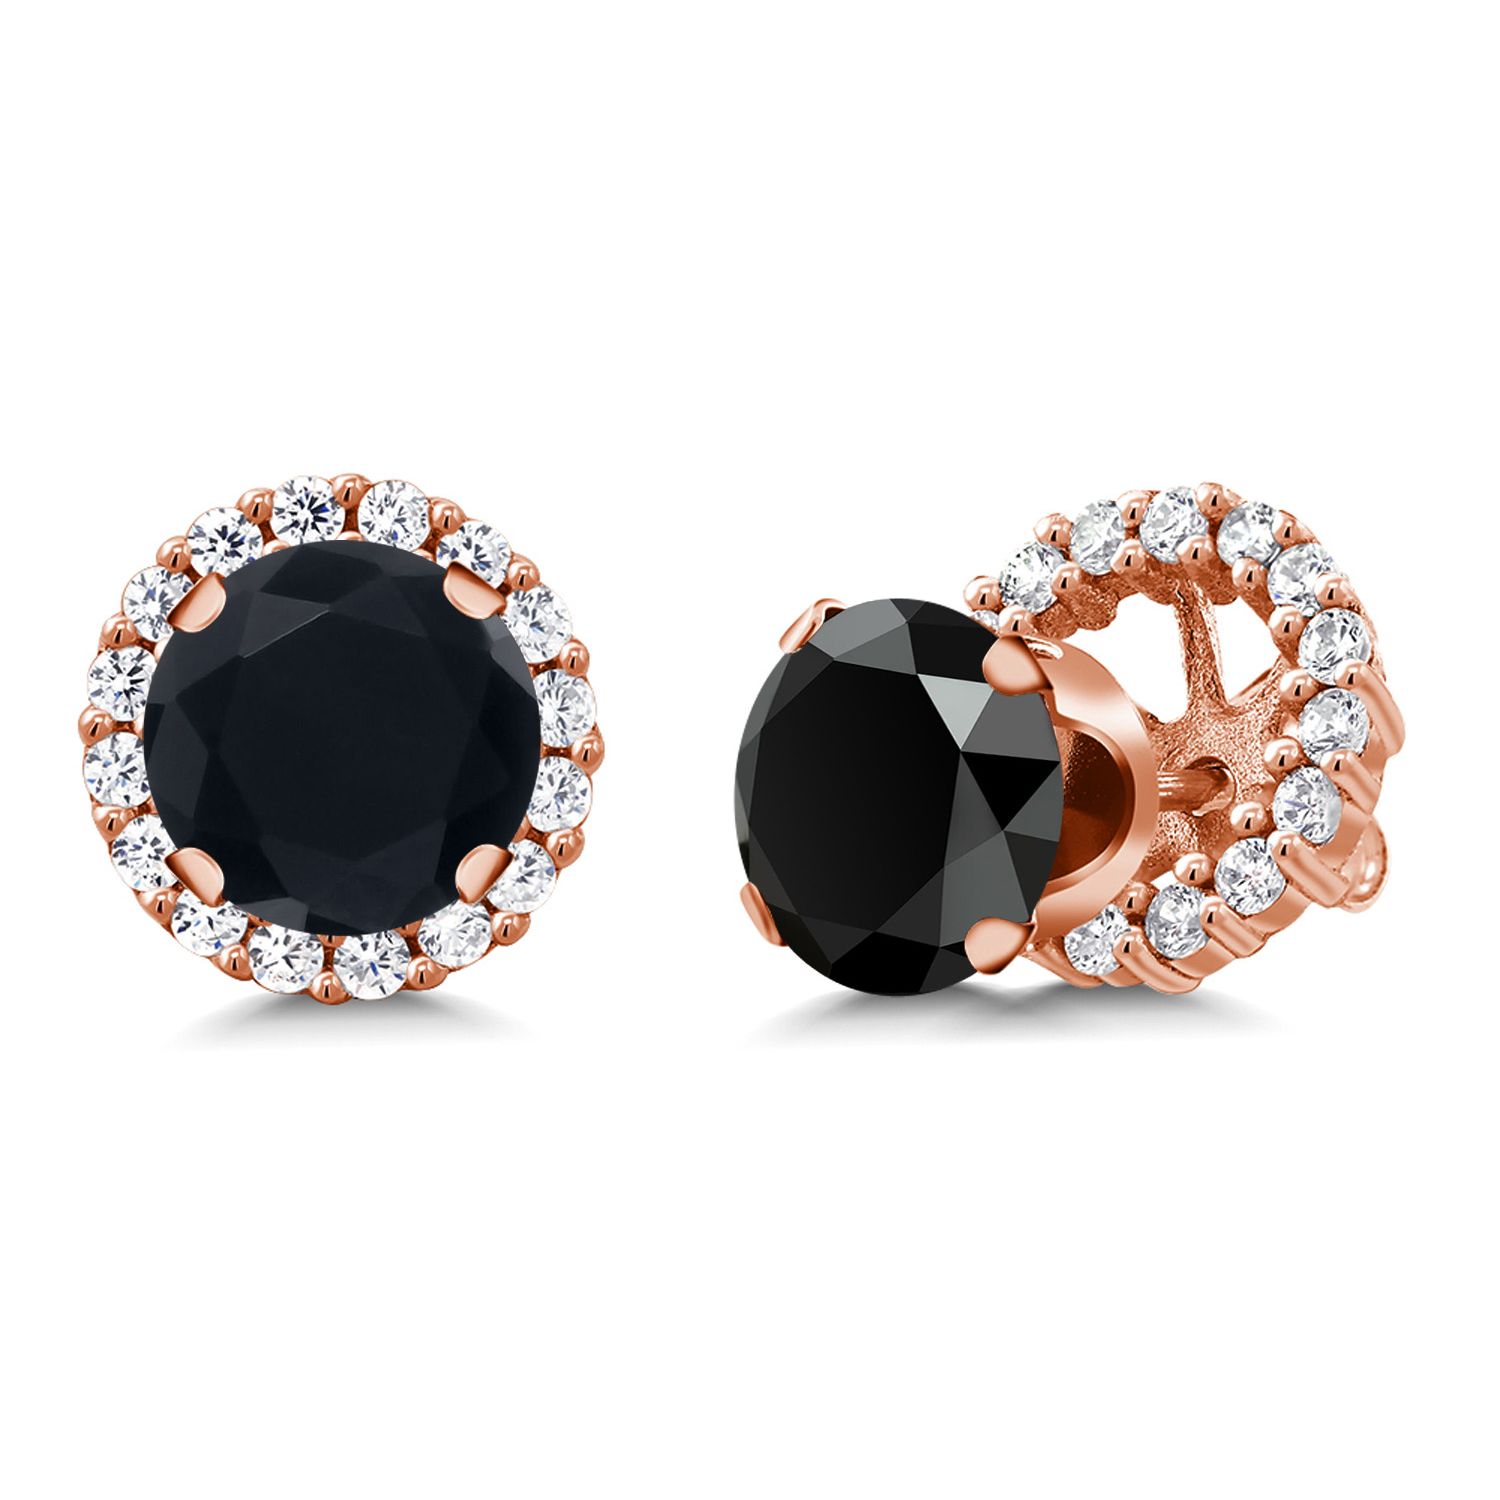 Gem Stone King 18K Rose Gold Plated Silver Black Onyx Stud Earrings with Jackets For Women (2.95 Cttw, Gemstone December Birthstone, Round 7MM)